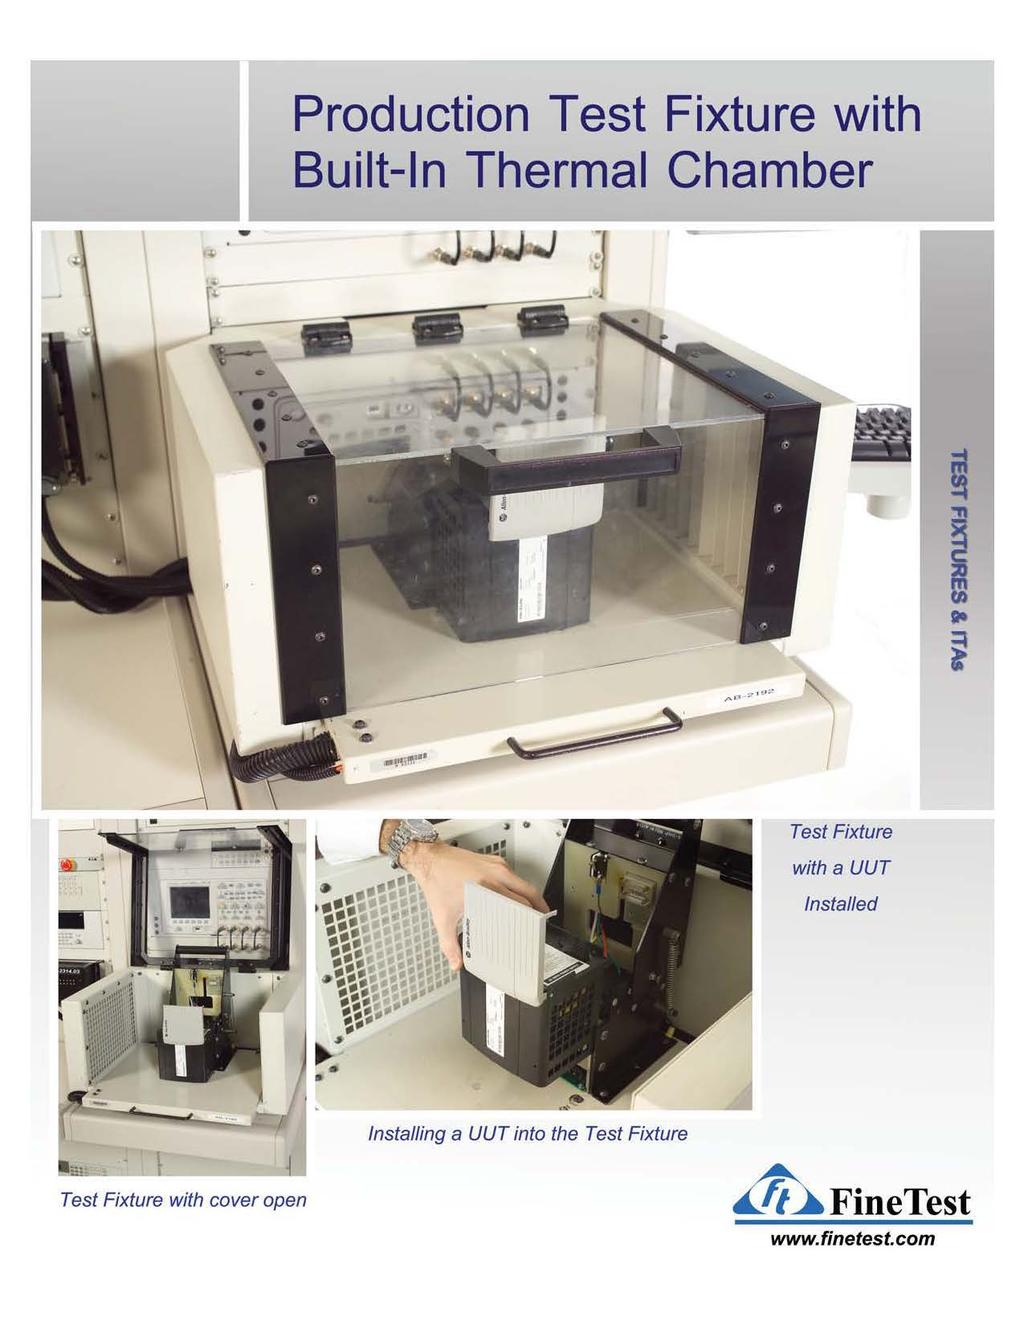 Production Test Fixture with Built-In Thermal Chamber Test Fixture.